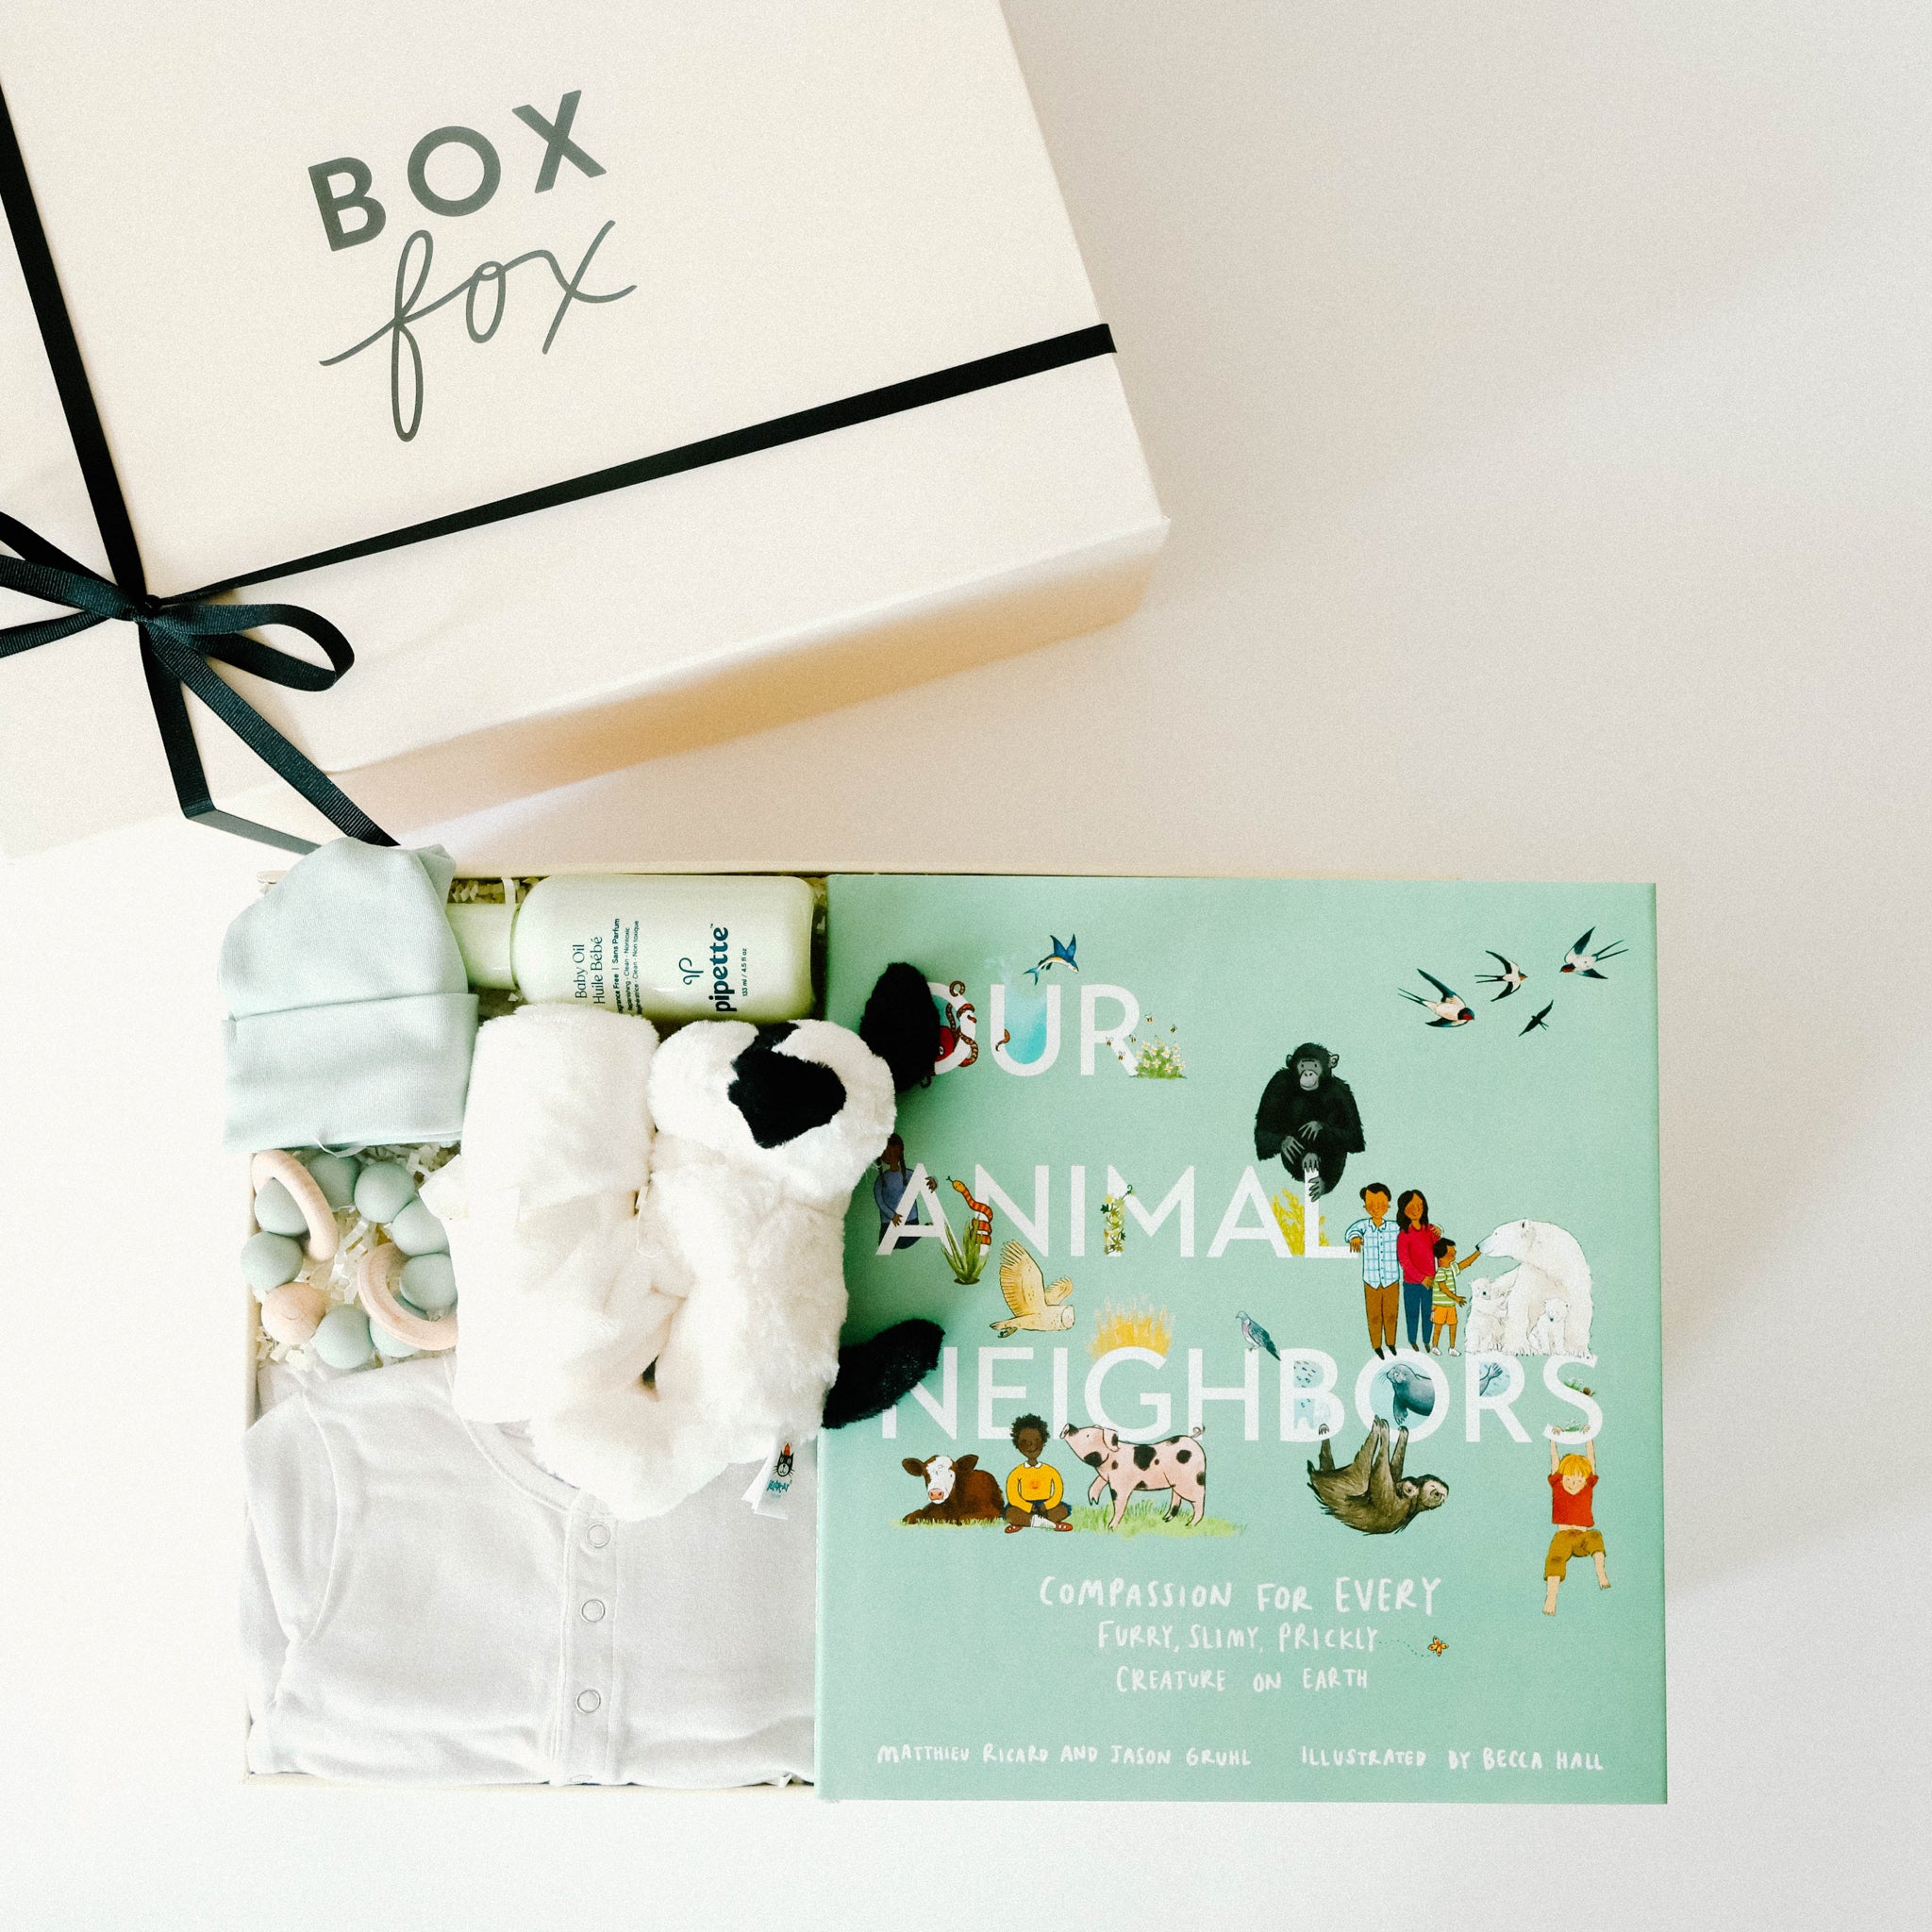 BOXFOX Original creme New Family Gift Box packed with PEHR cozy grey kimono onesie 3-6 months, Jellycat puppy lovey, Our Animal Neighbors book, Pipette baby oil, Alva sage green teether, and Alva sage green beanie.